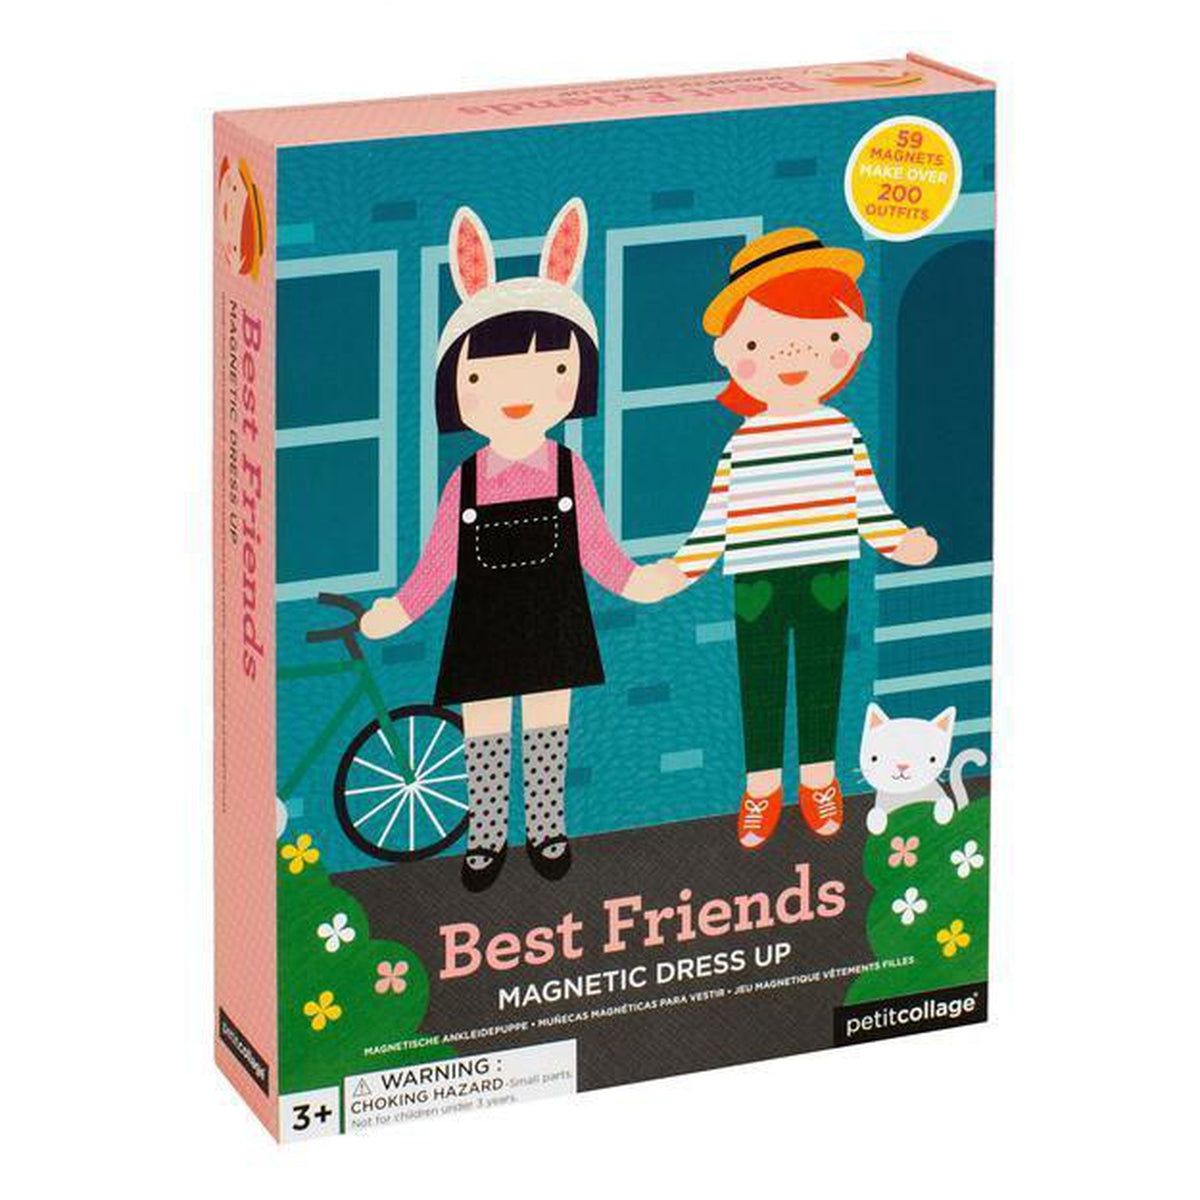 Petit Collage best friends magnetic dress up-arts & crafts-Petit Collage-Dilly Dally Kids